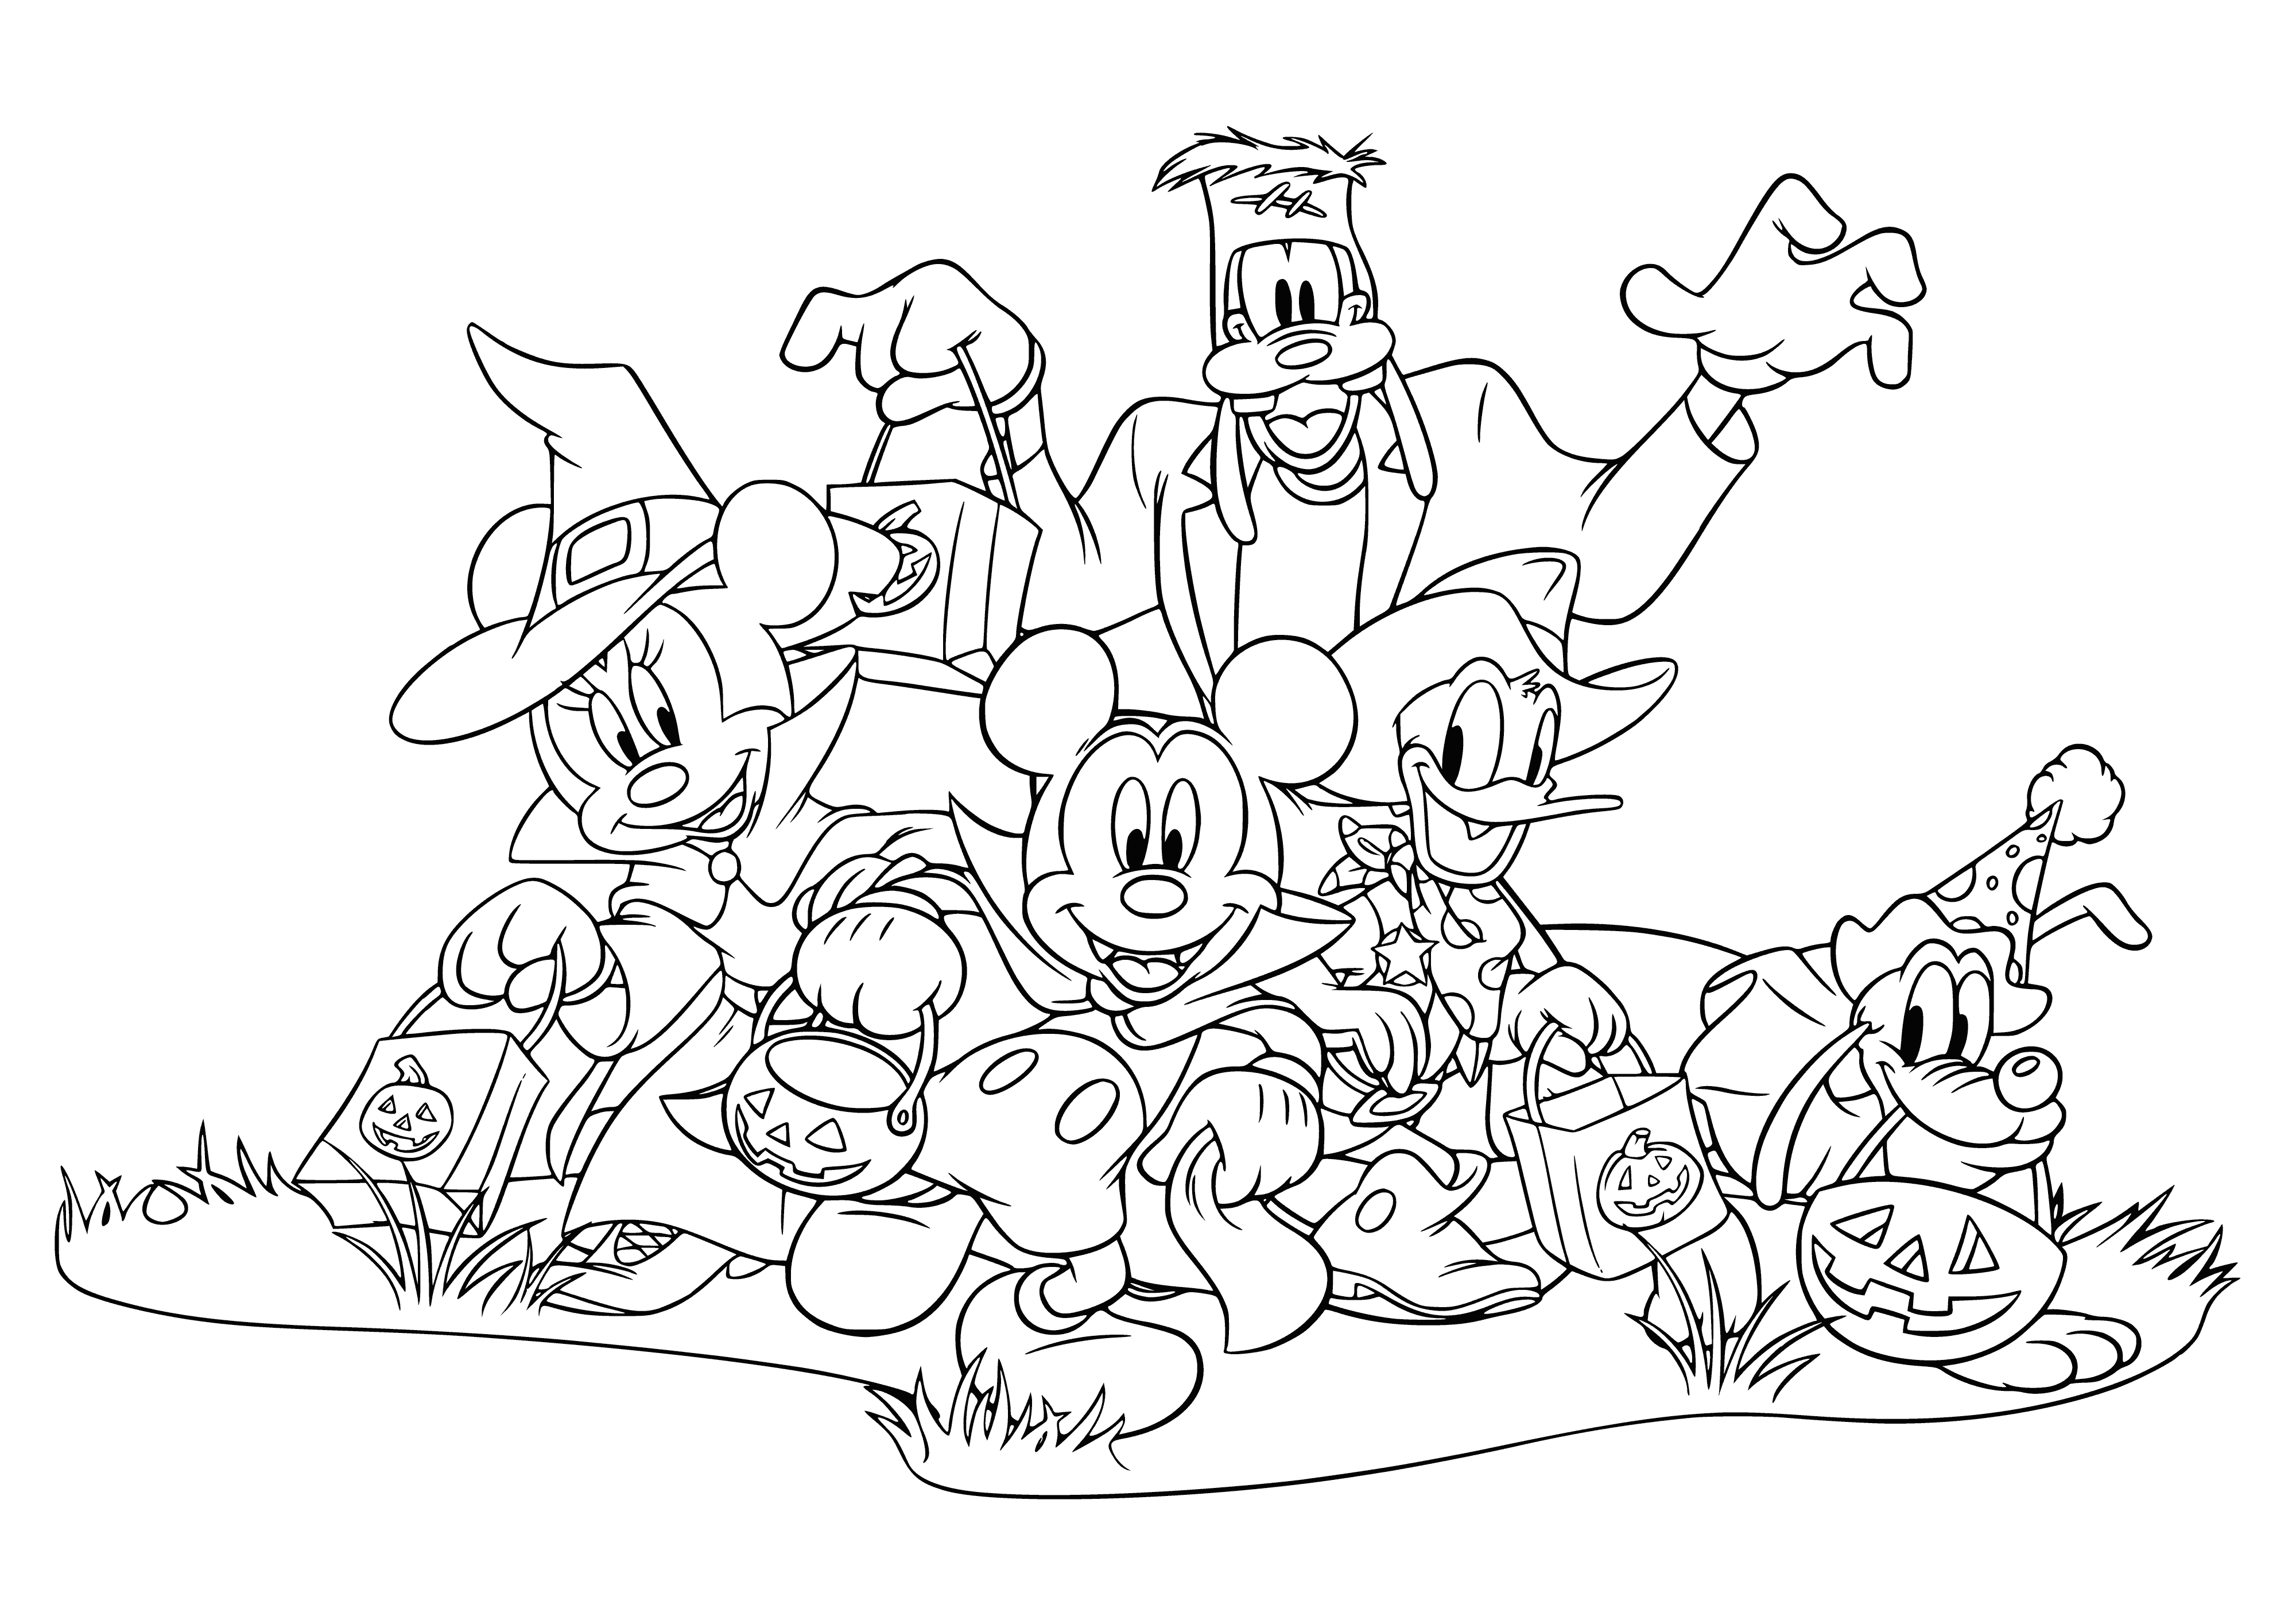 coloring page: The 6 Mickey Mouse friends wear Halloween costumes: pirate Donald, superhero Goofy, devil Pluto, prince Mickey, witch Minnie, ghost Daisy standing on pumpkin-mat in front of orange full moon.